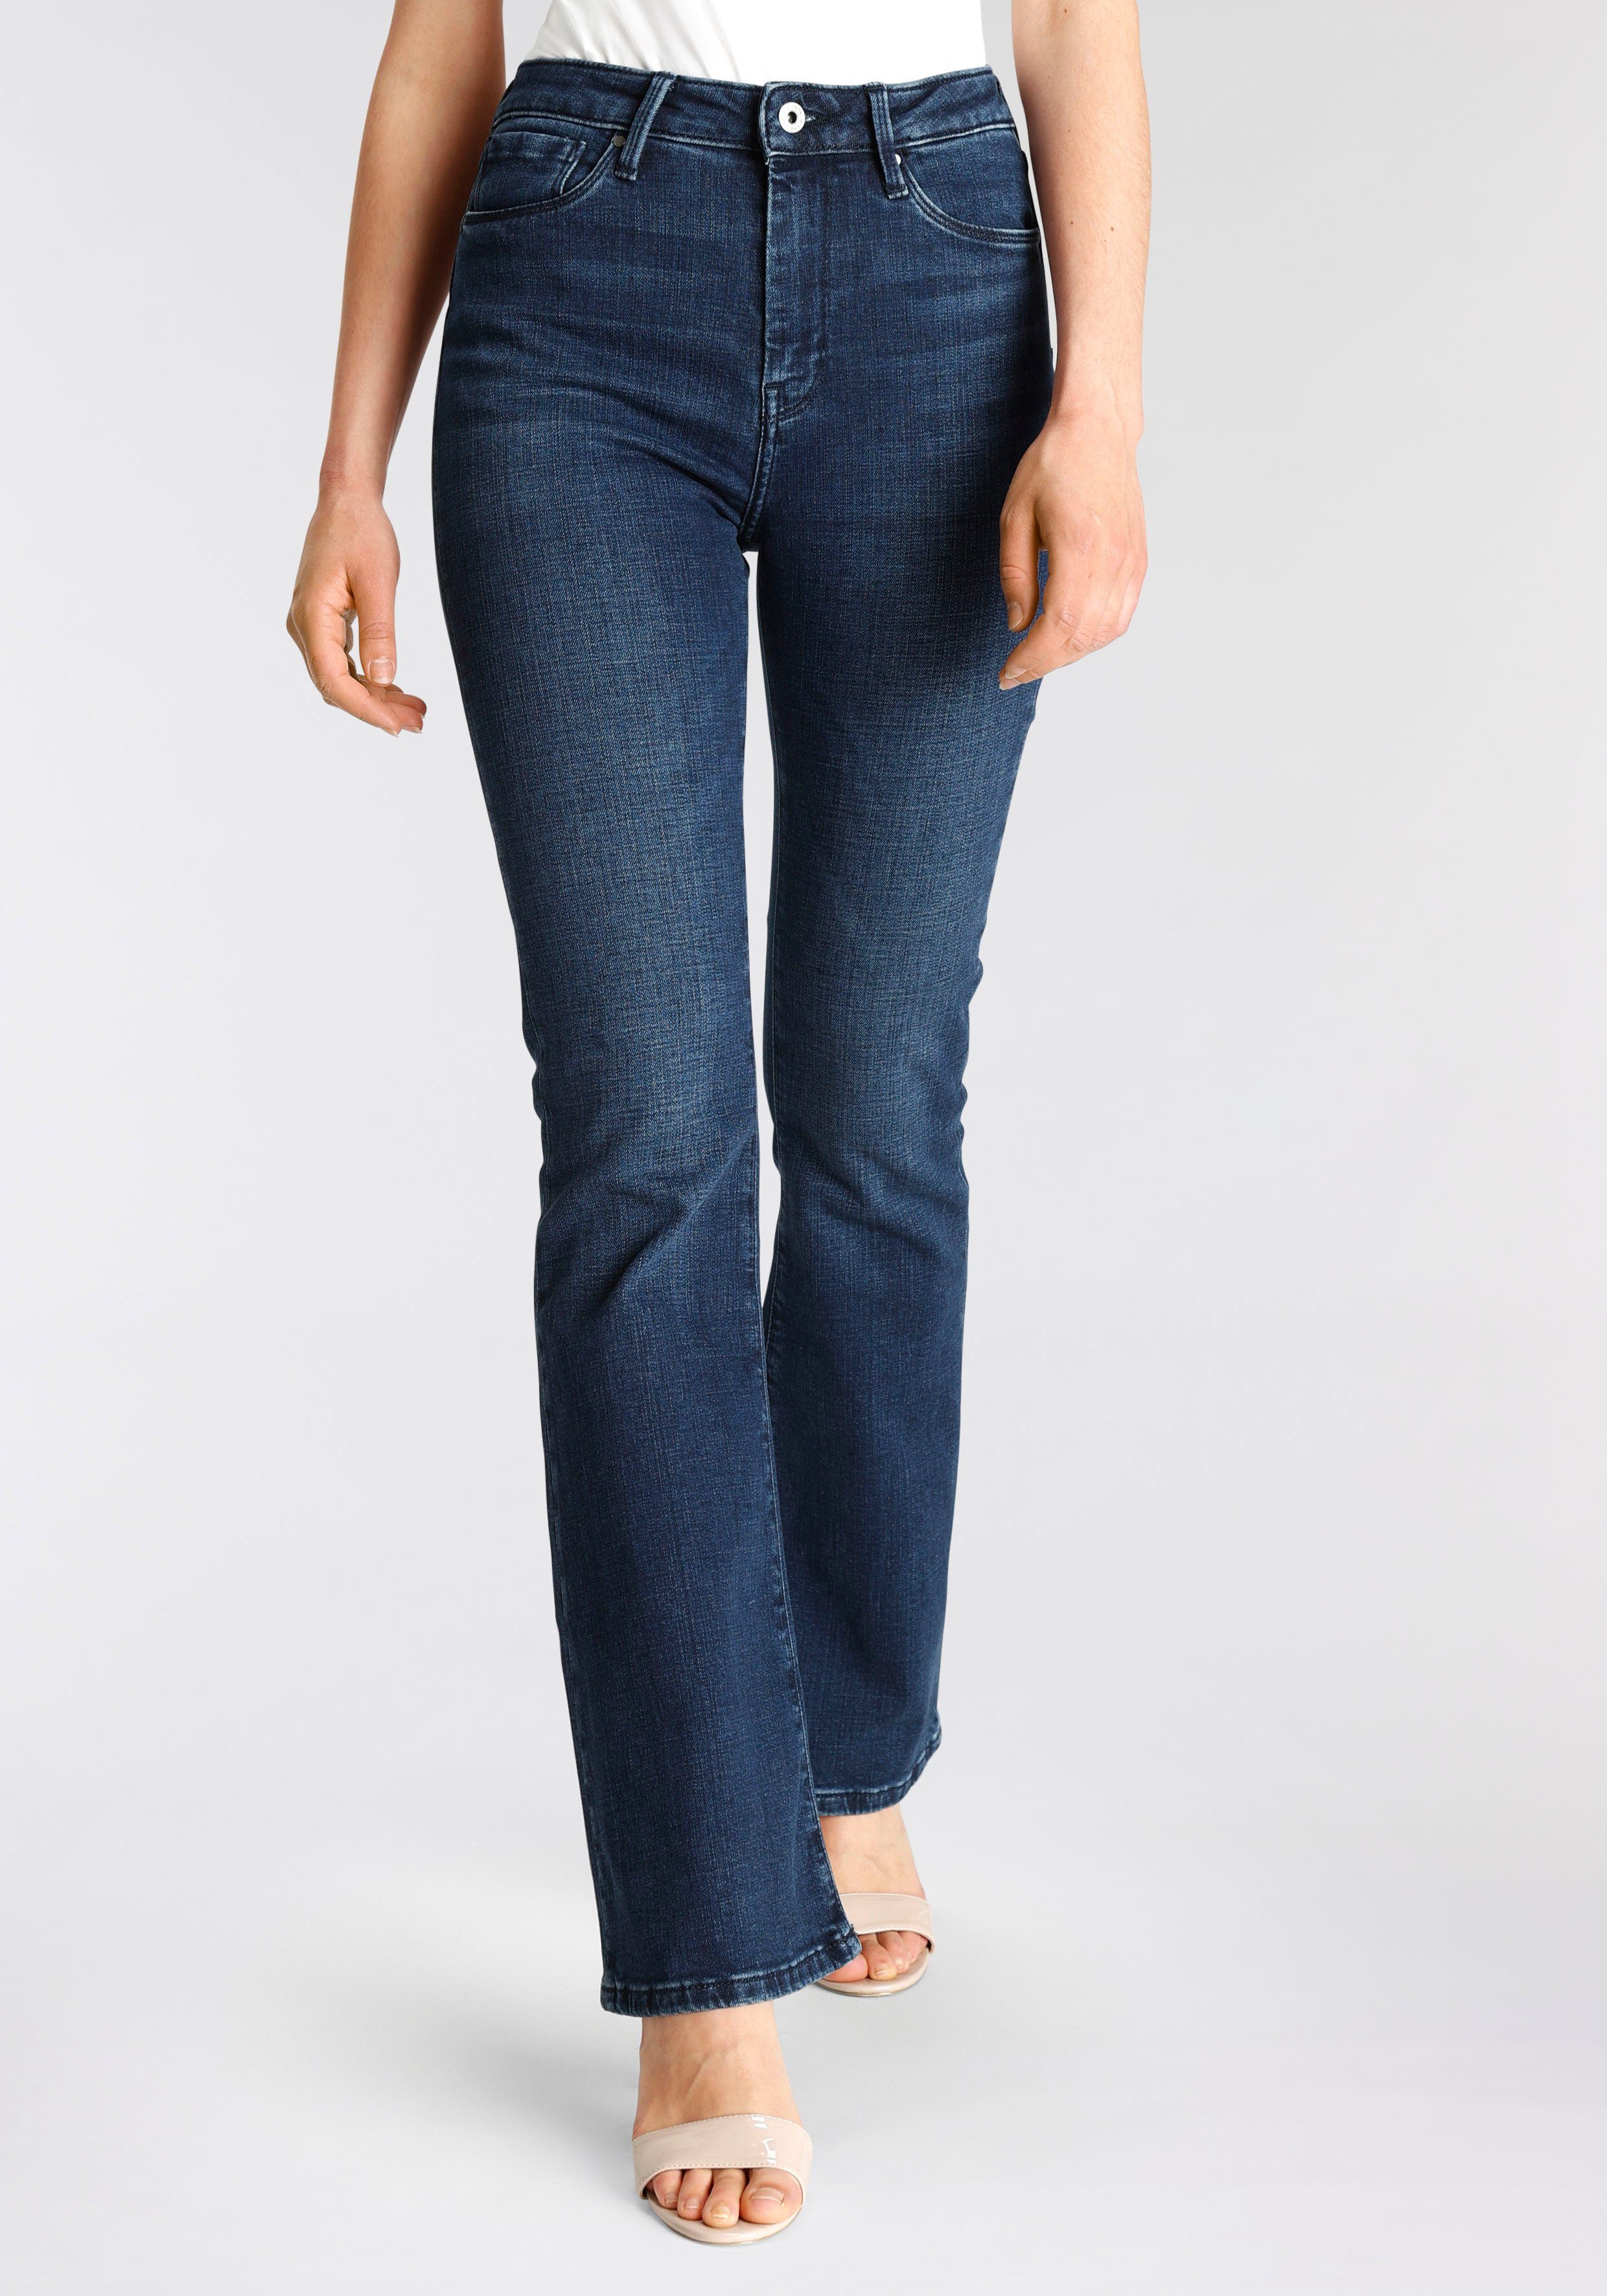 Pepe Jeans Bootcut-Jeans Dion Flare, Jeans >>Dion Flare<< von Pepe